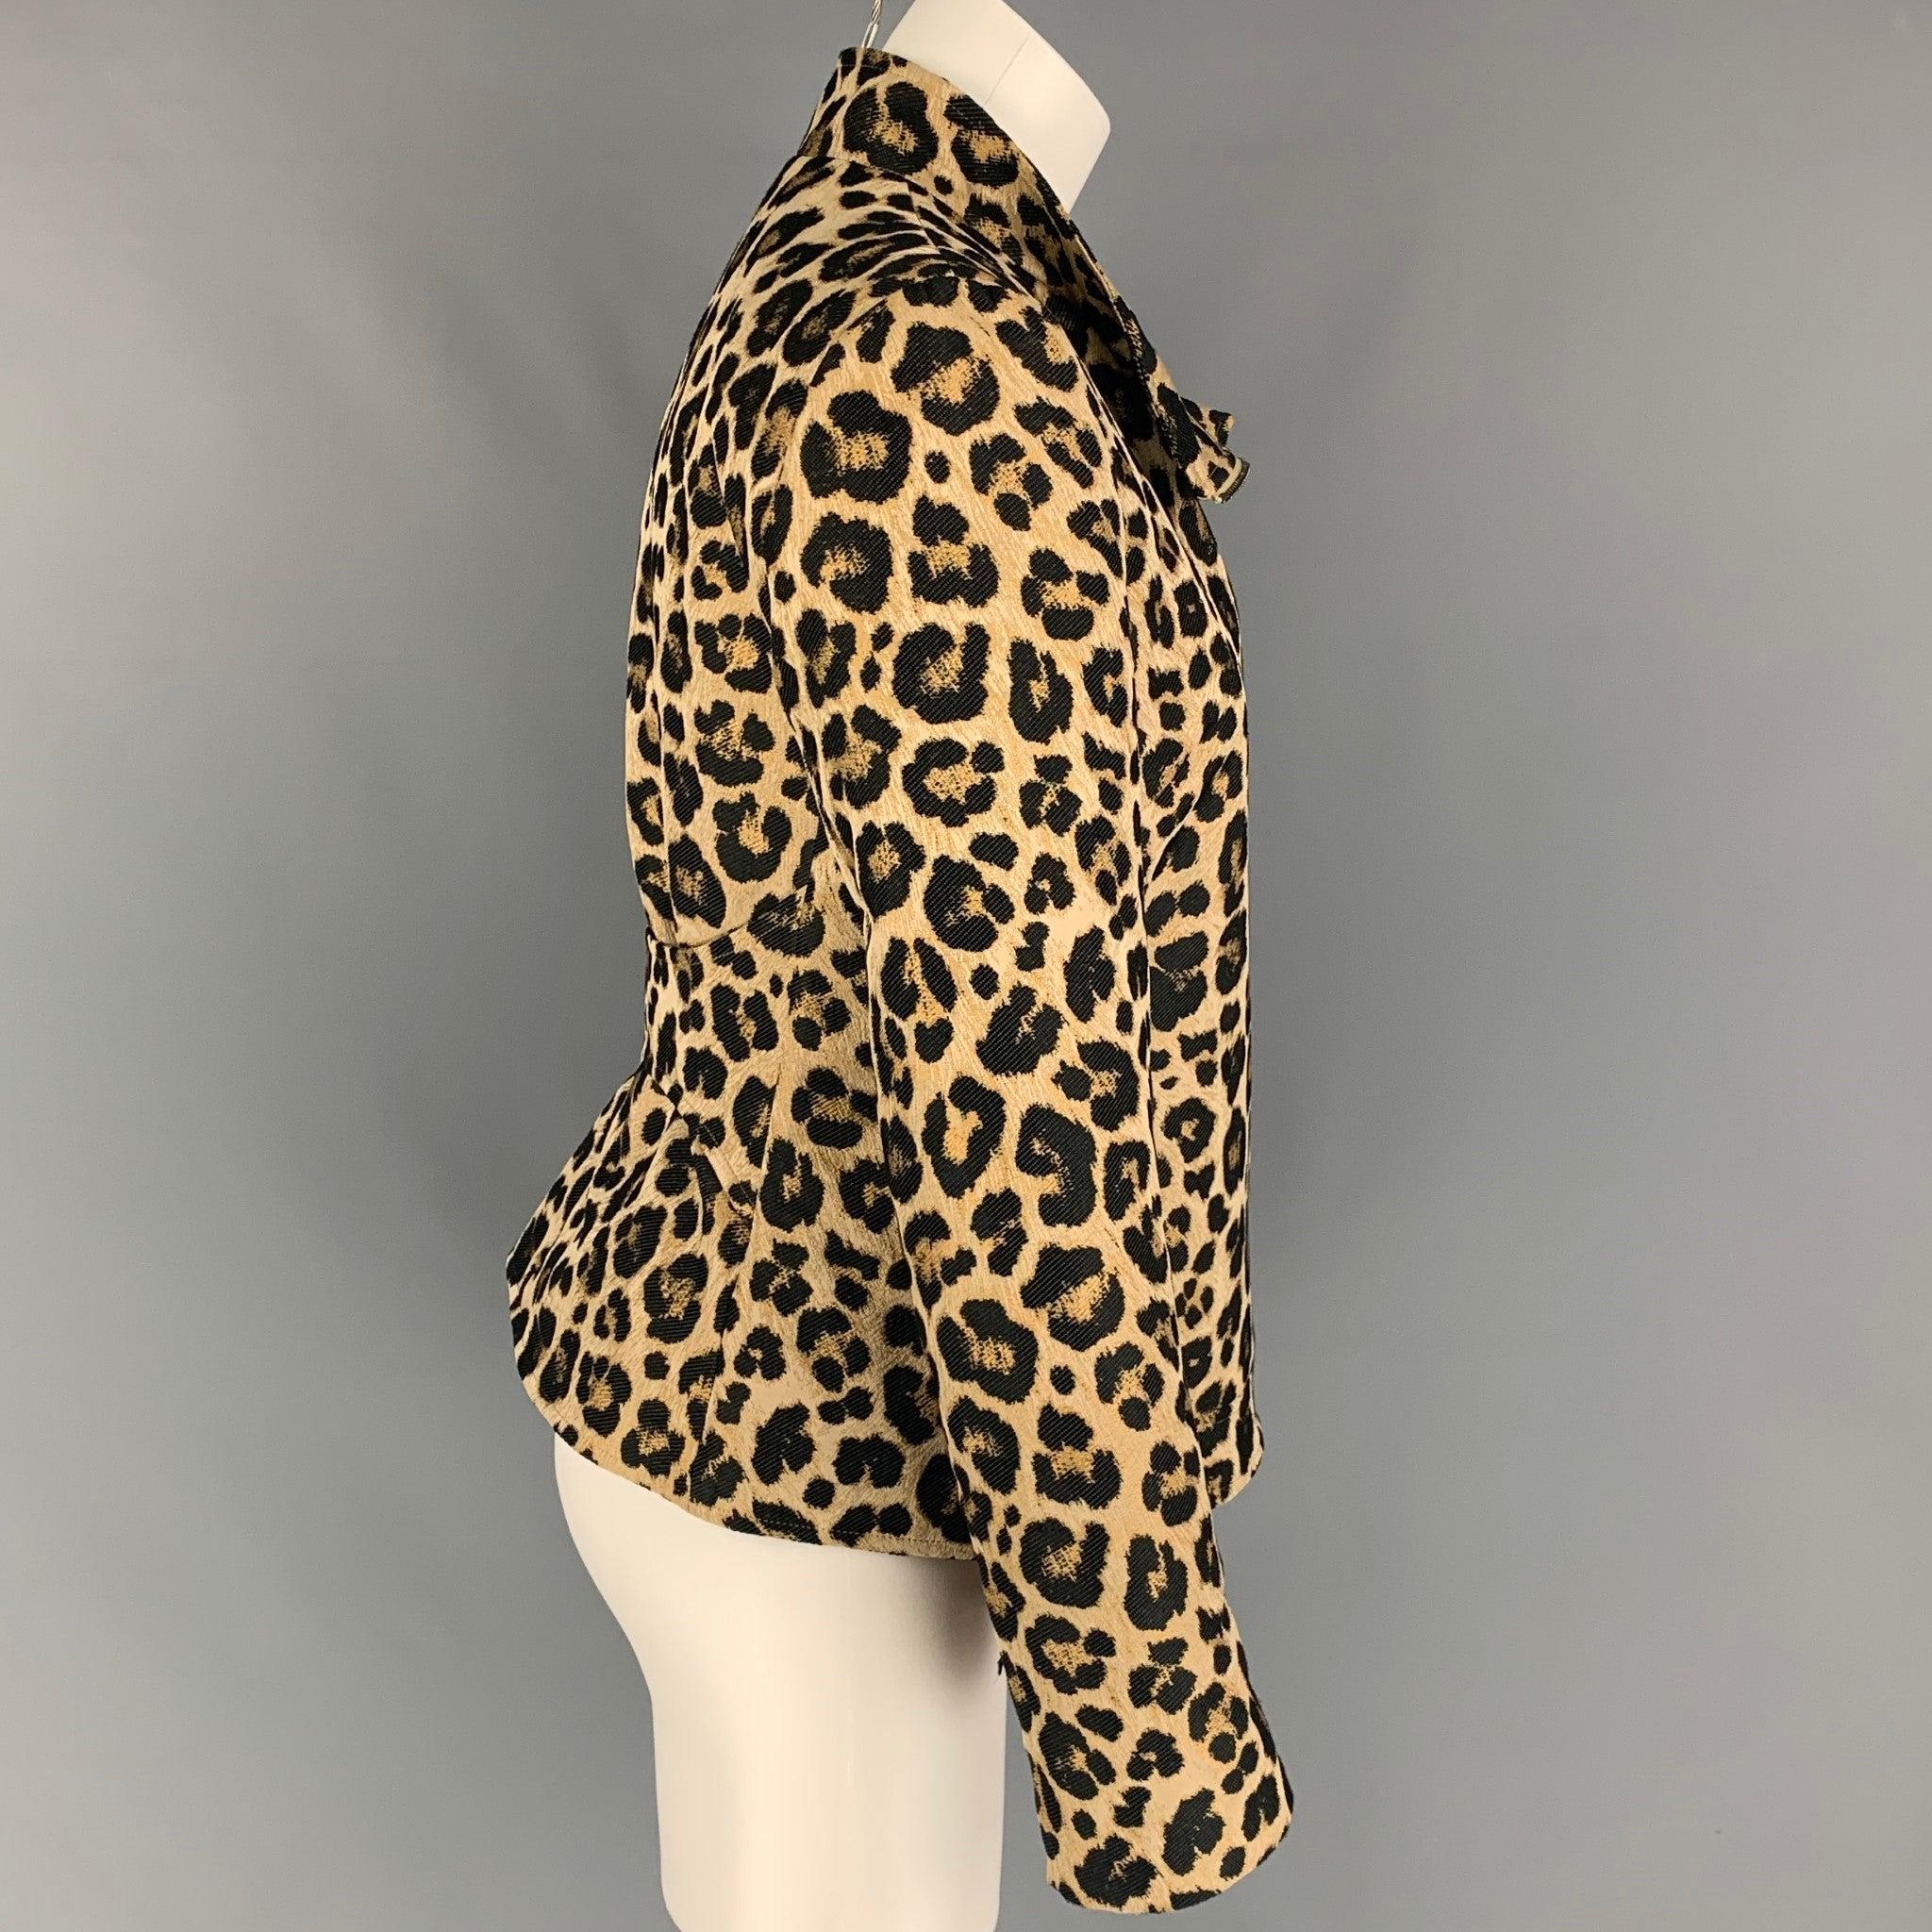 GIORGIO ARMANI jacket comes in a tan & black animal print polyester with a quilted liner featuring a back strap, slit pockets, and a full zip up closure. Made in Italy.
Very Good
Pre-Owned Condition. 

Marked:   42 

Measurements: 
 
Shoulder: 16